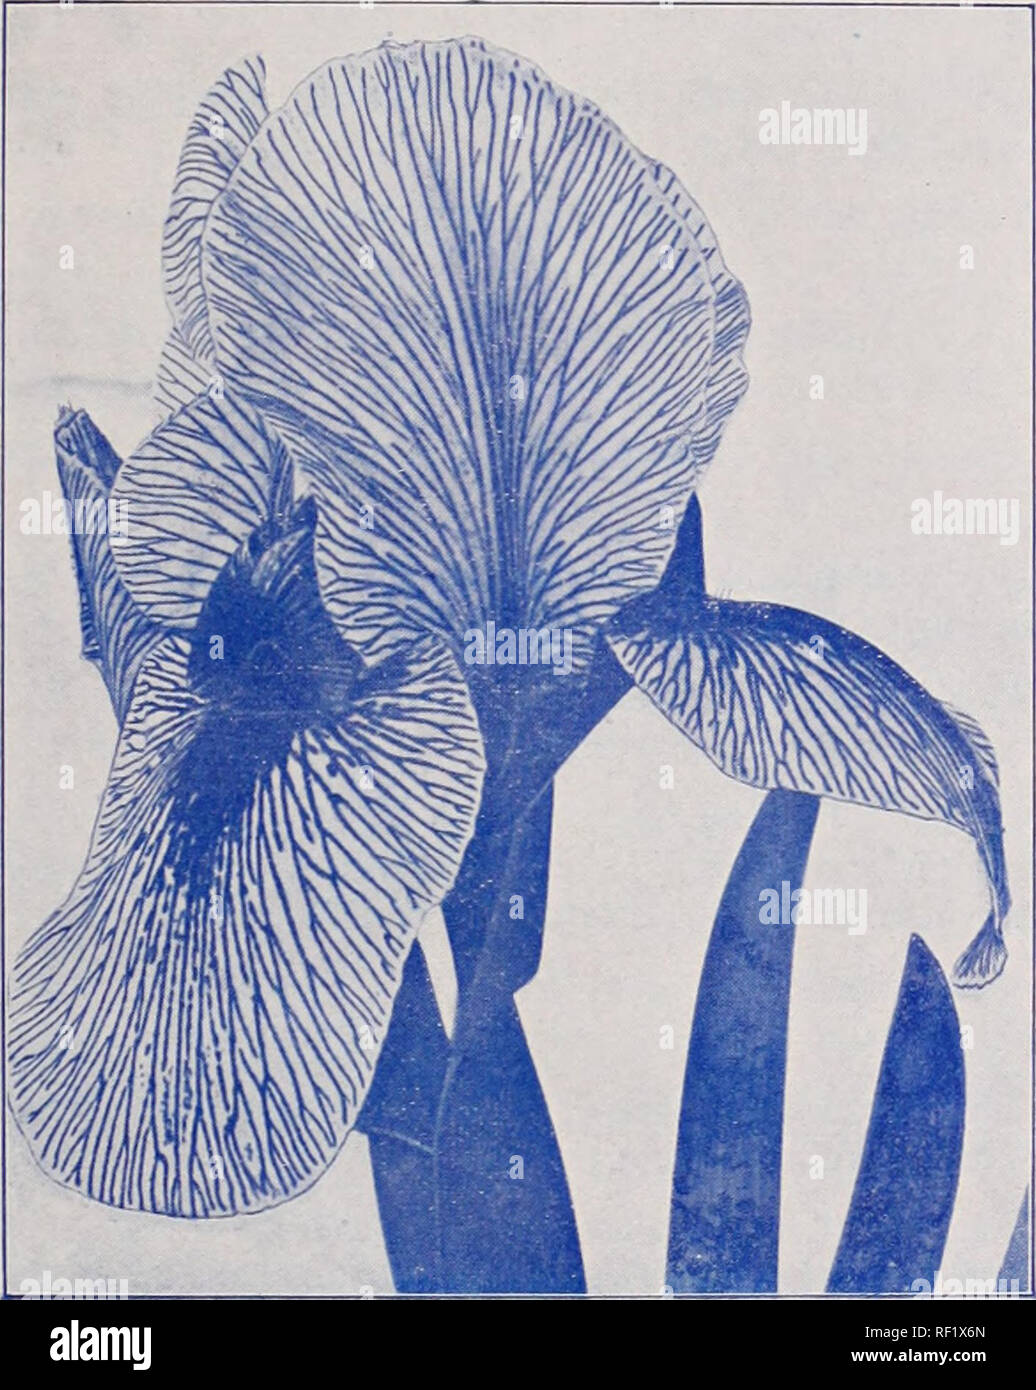 . Catalogue of Dutch bulbs / J.J. Grullemans &amp; Sons.. Nursery Catalogue. Novelties 1907.. Flower of a Regelio-Cyclus Iris. Regelio-Cyclus (onco-Regelia) Iris. Awarded on the different London shows with first class Certificates and Awards of merit This beautiful new race of Iris, flowers and cultivates with great eassiness, comparing with the Onocyclus Iris (Iberica, Lorteti etc.) who are most difficult to cultivate. The flowers are of the same size of ordinairv (hiocyclus. and of satiny white, rose, braunish or violet ground, and are veined black. The flower- stems are strong and of good l Stock Photo